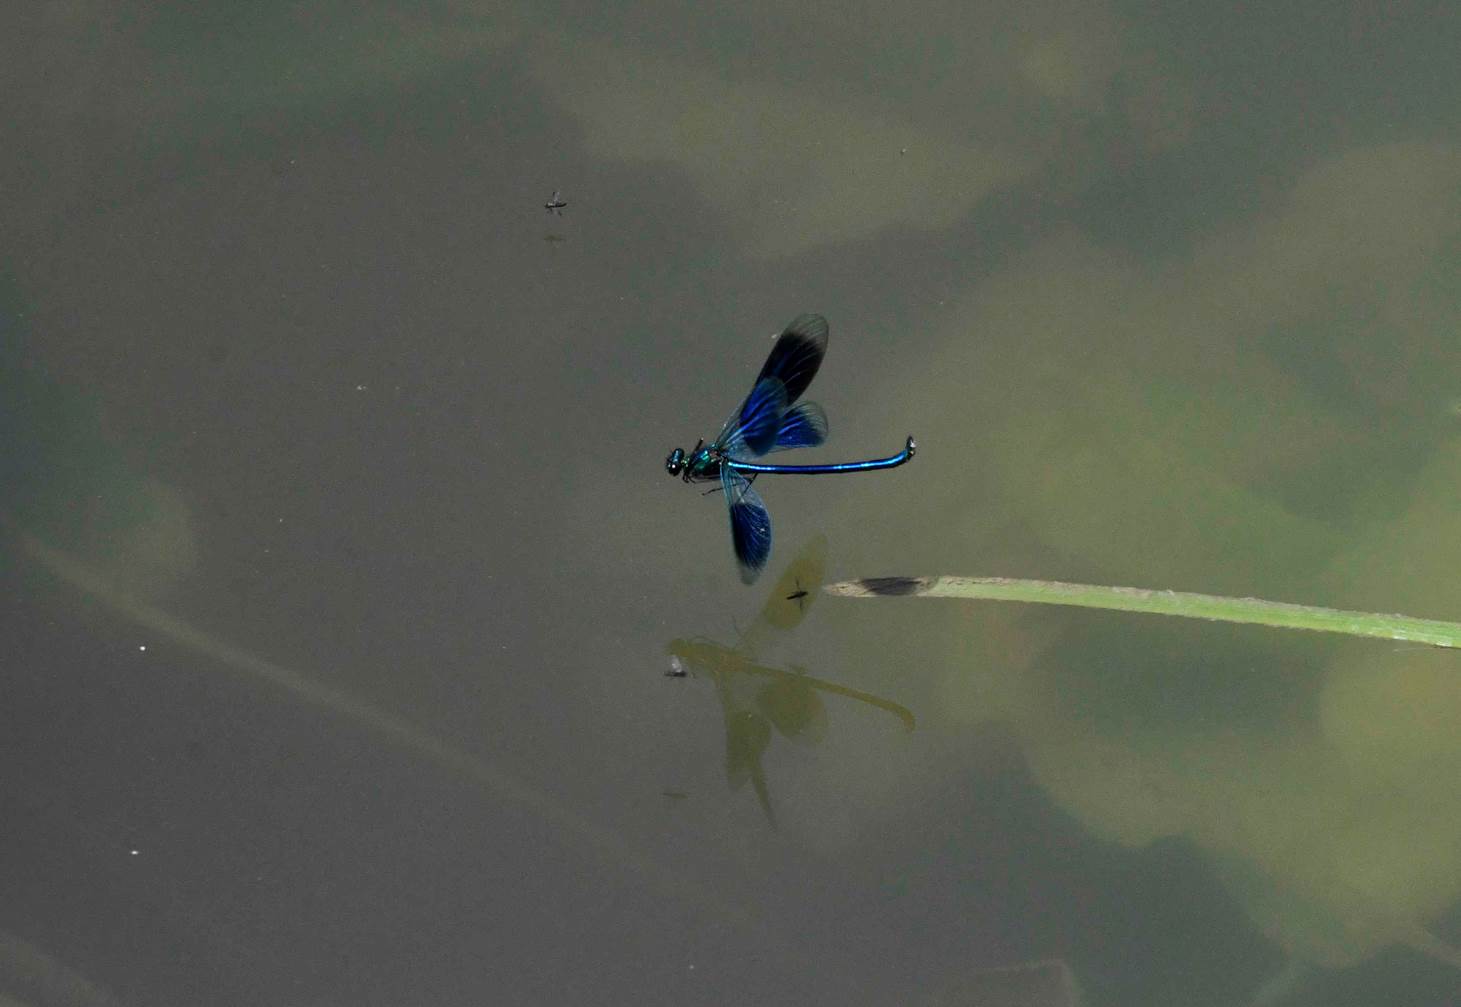 A dragonfly in the water

Description automatically generated